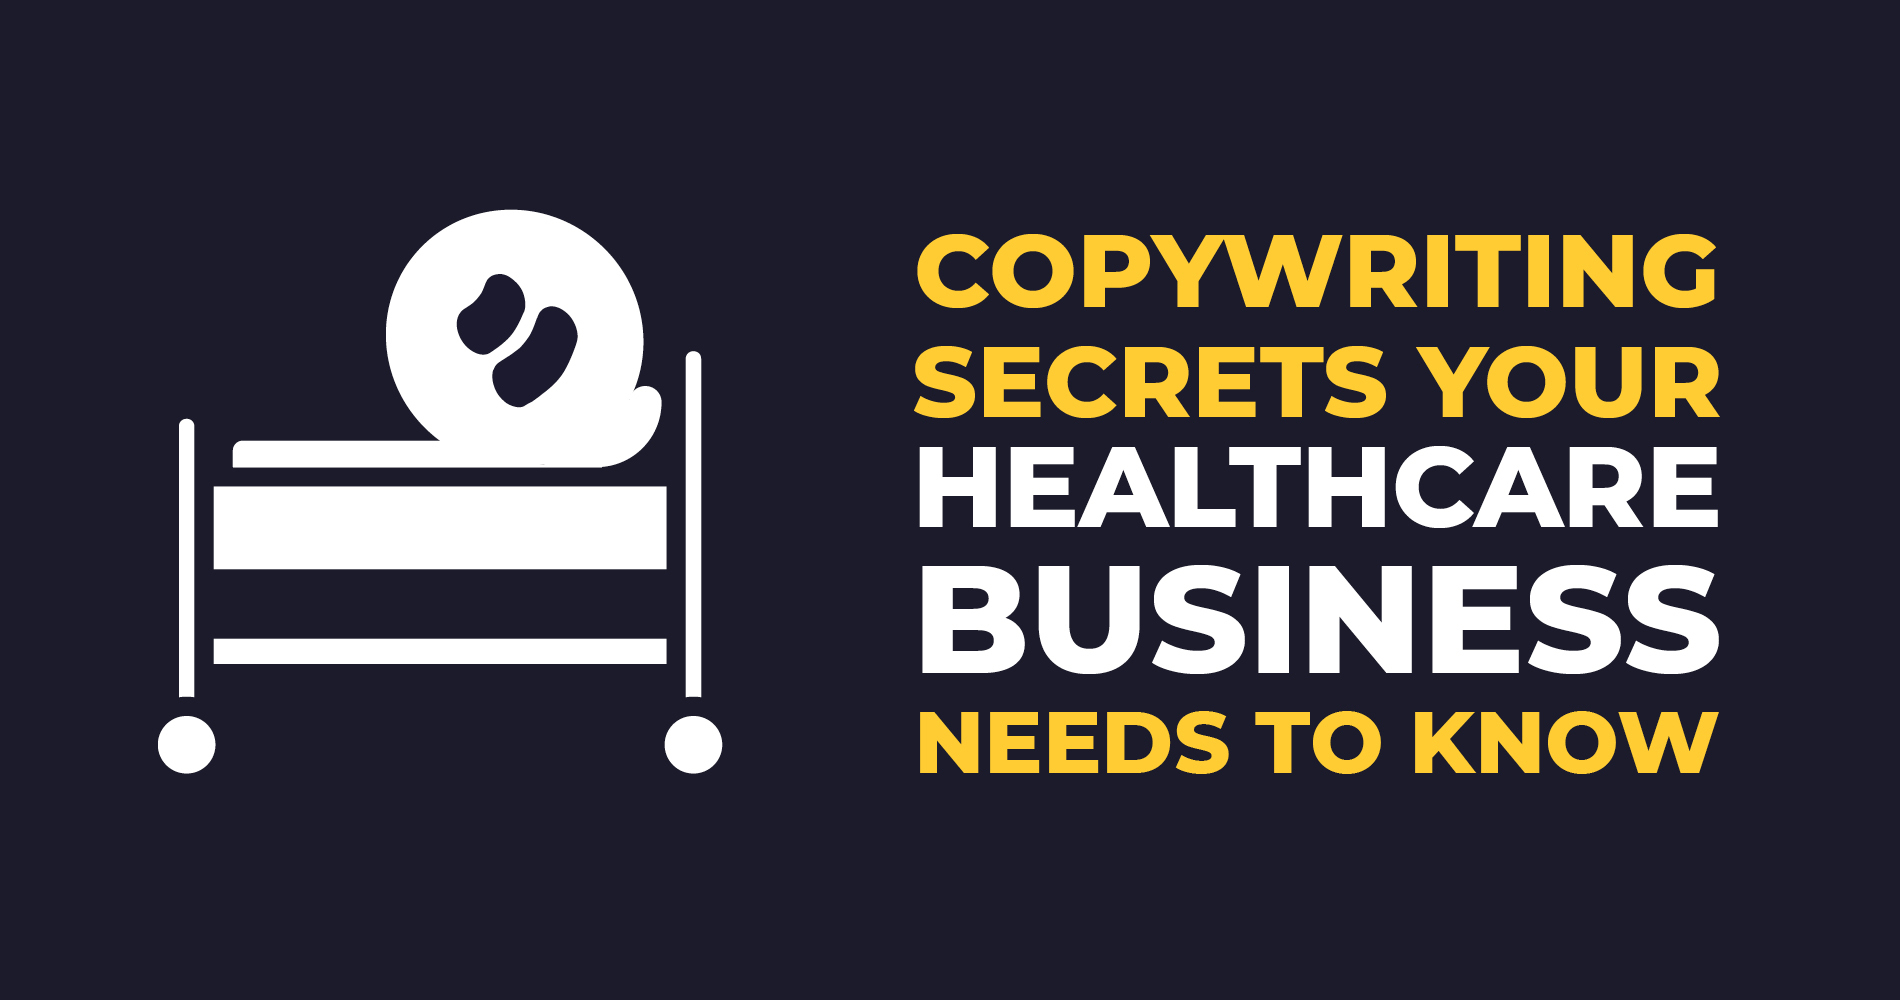 Copywriting secrets your healthcare business needs to know